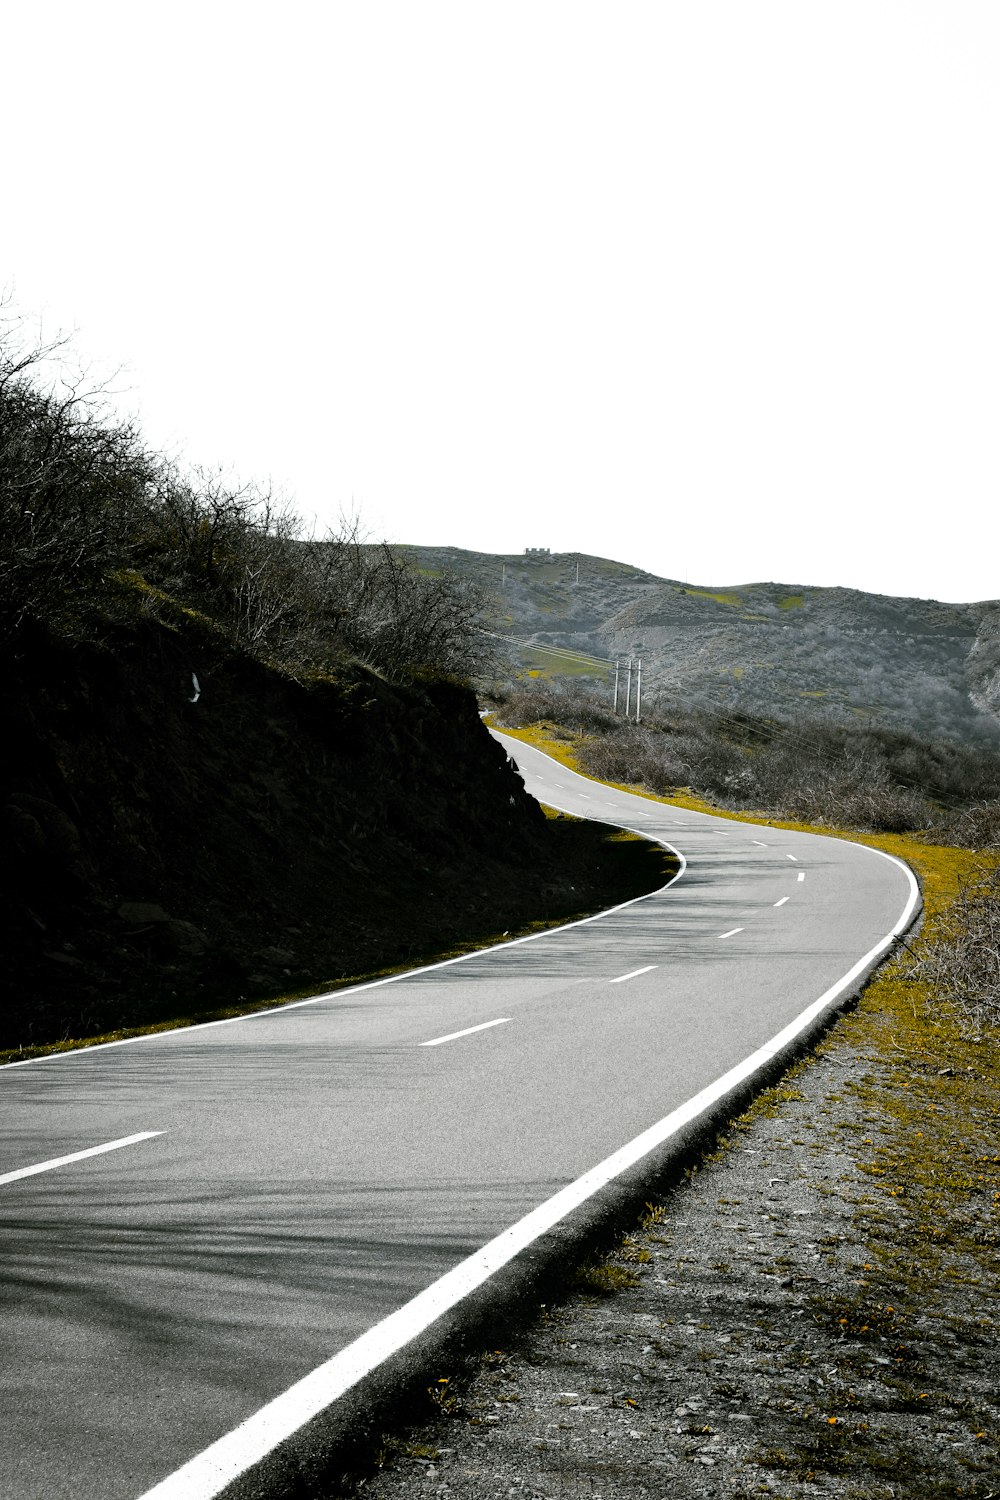 a curved road in the middle of a hilly area